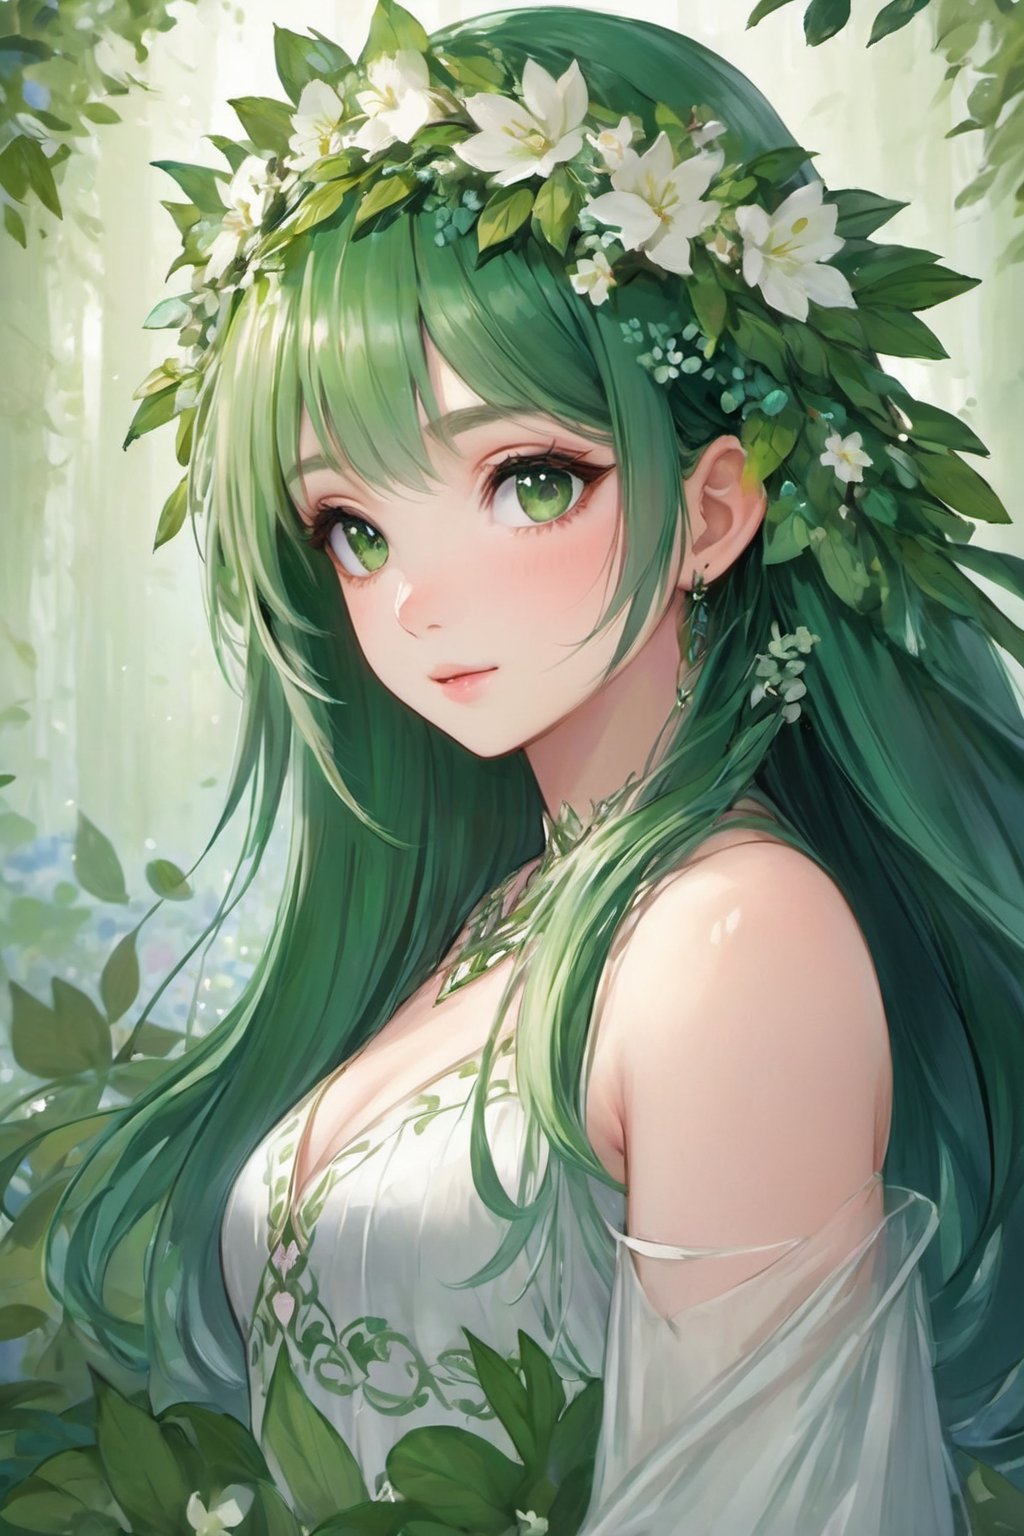 portrait, solo, upper body, looking at viewer, detailed background, detailed face, 1girl, nymph, ethereal, nature-inspired, almond-shaped face shape, emerald eye color, cascading green hair, leafy attire, floral crown, serene expression, mystical feeling of the image.